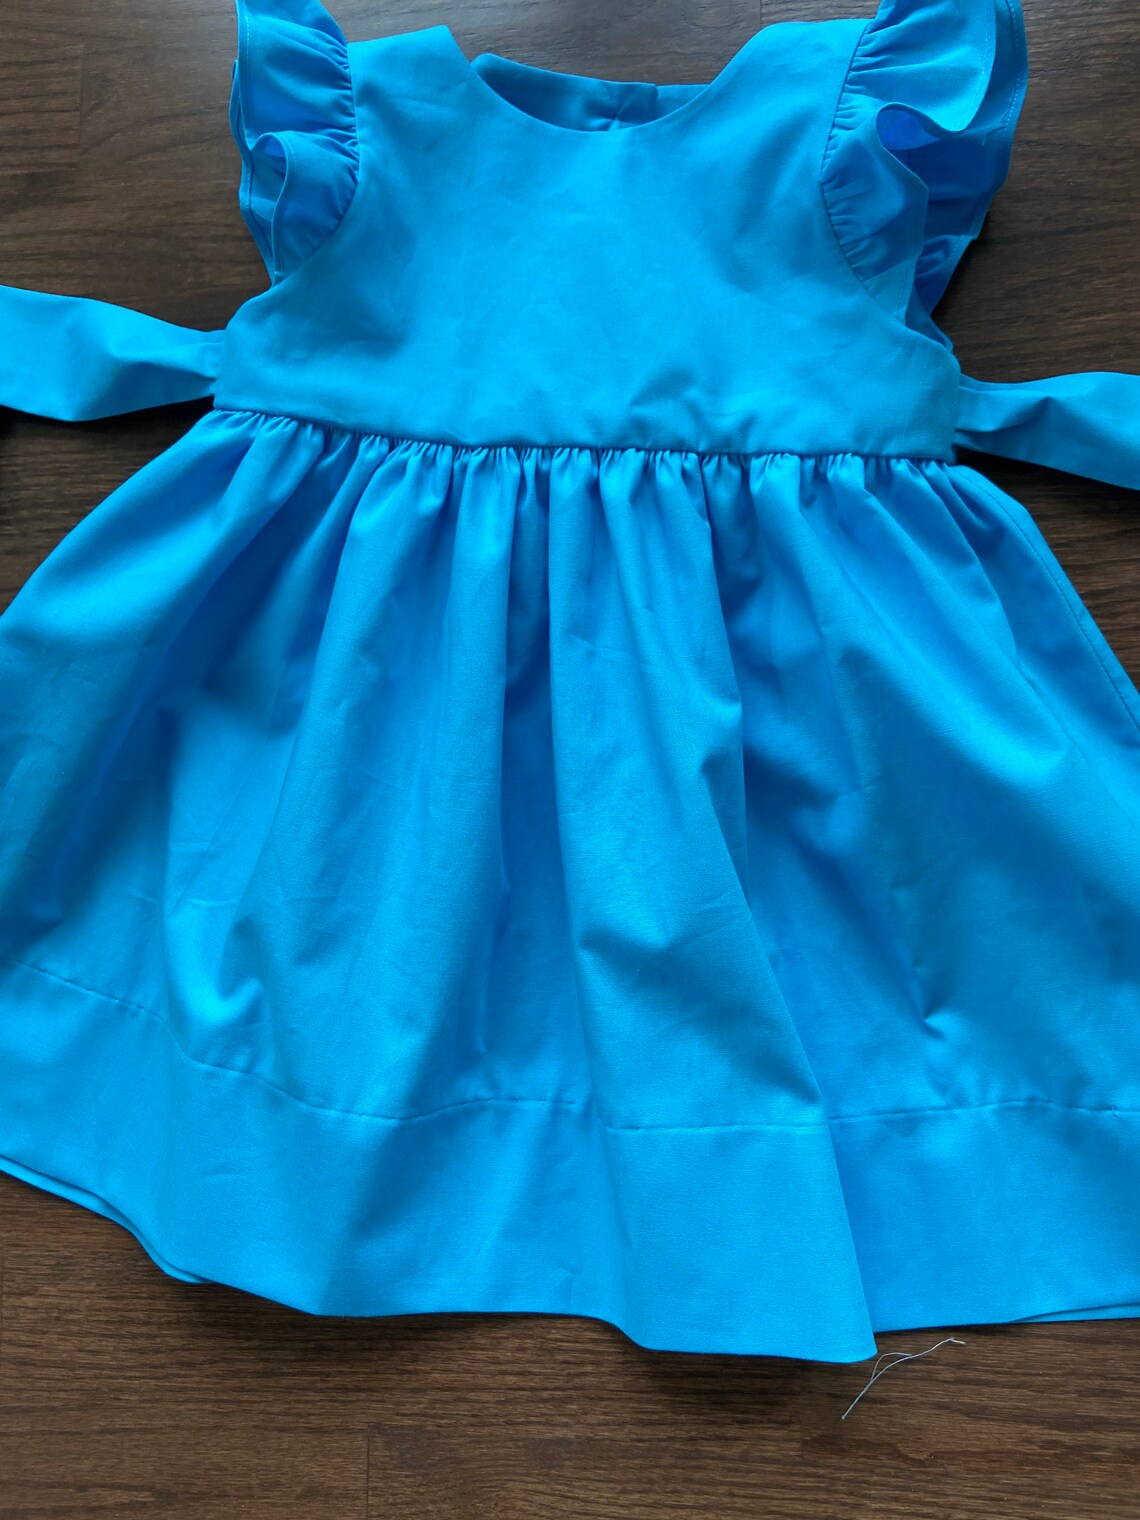 Blue Dress Flutter Sleeves 2021 Color of the Year Toddler | Etsy